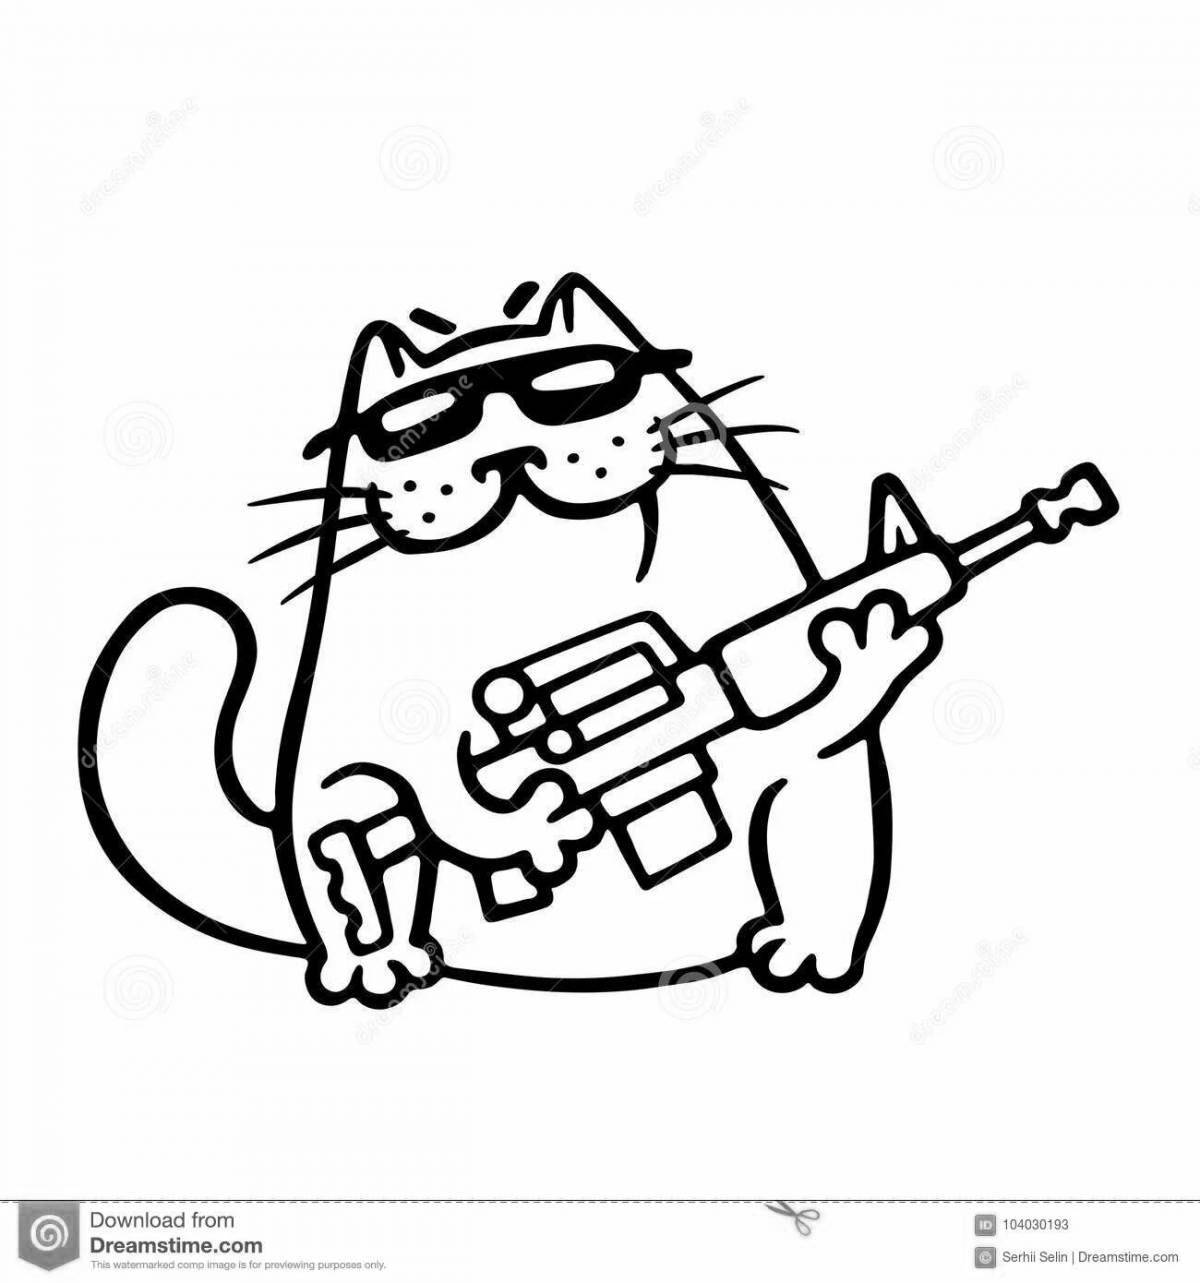 Courageous military cat coloring page